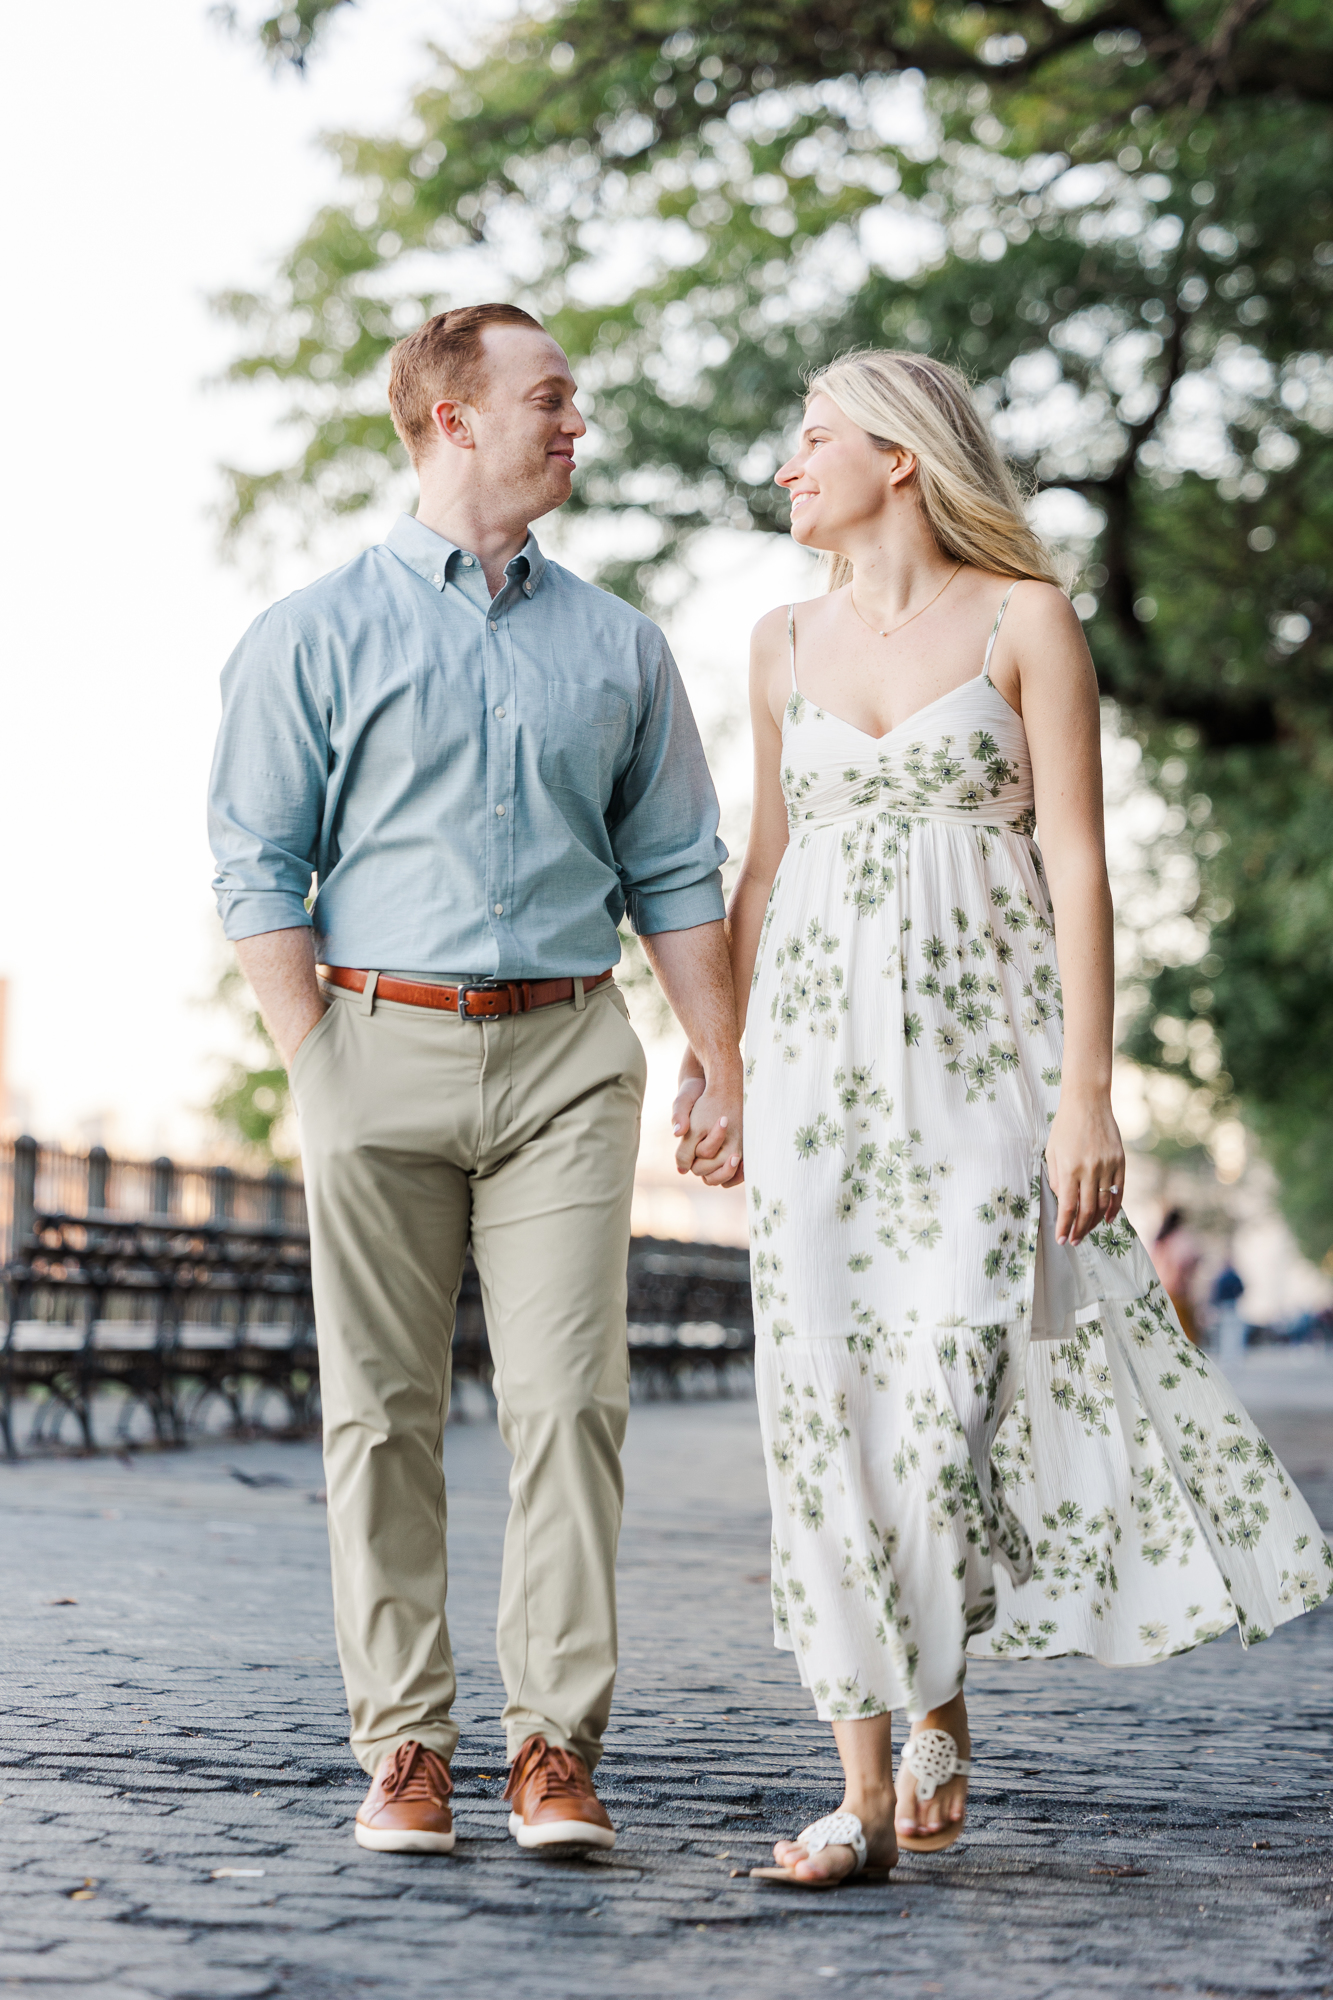 Bright Engagement Photos In Brooklyn Heights